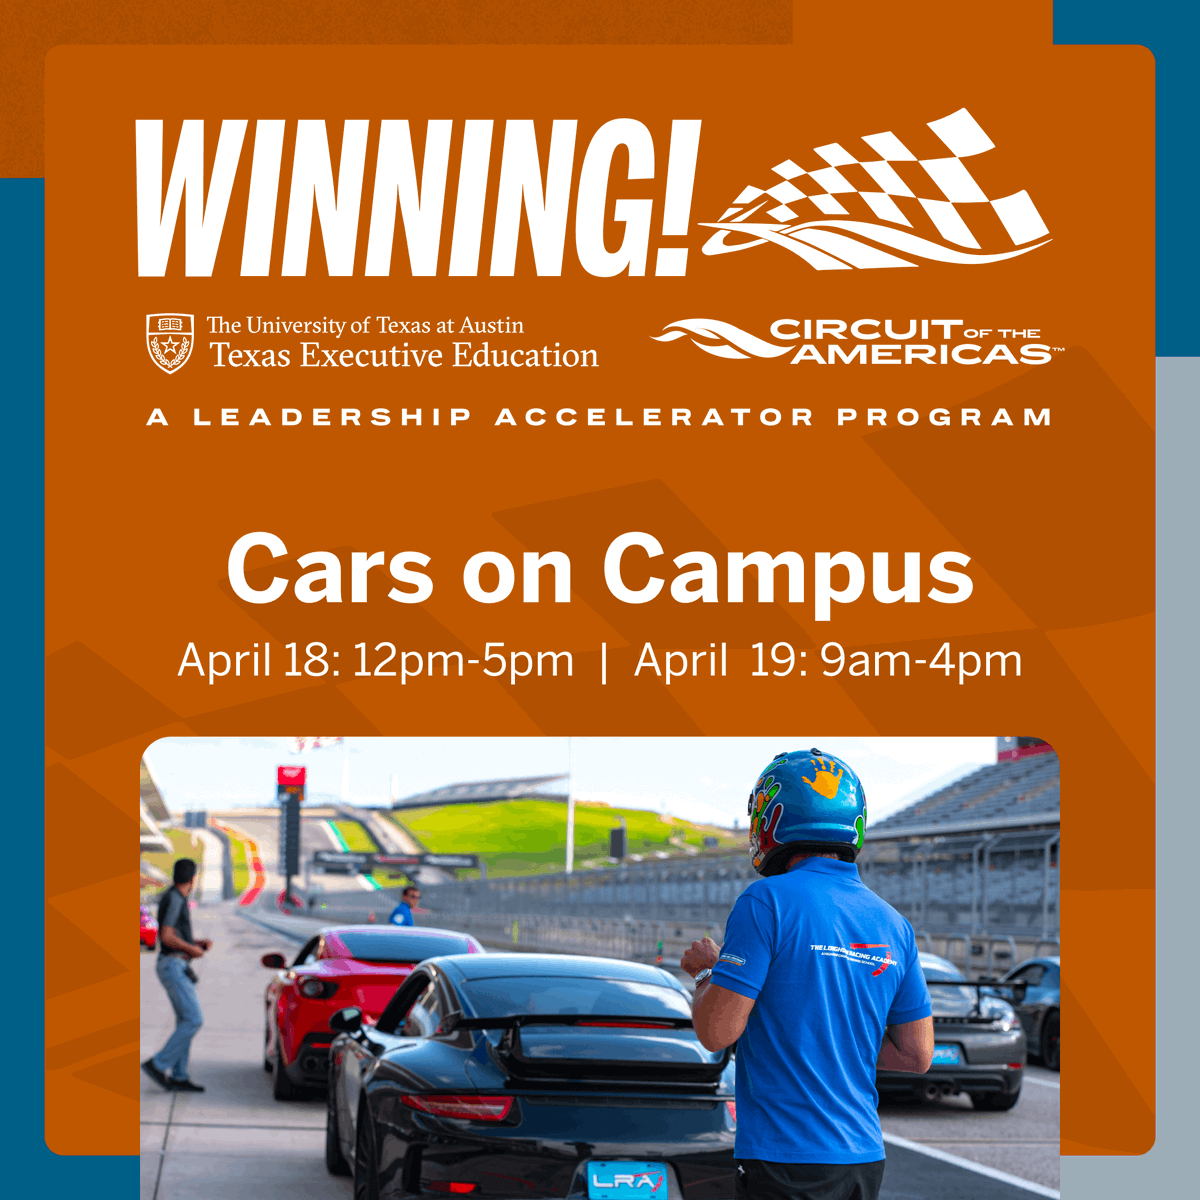 Today is the day! Join us between 12-5 pm for Cars on Campus outside Rowling Hall and the AT&T Conference Center. Don’t miss your chance to check out the cars, take some photos, and learn more about our new Leadership Accelerator Program, “Winning!” medium.com/@UTexasMcCombs…